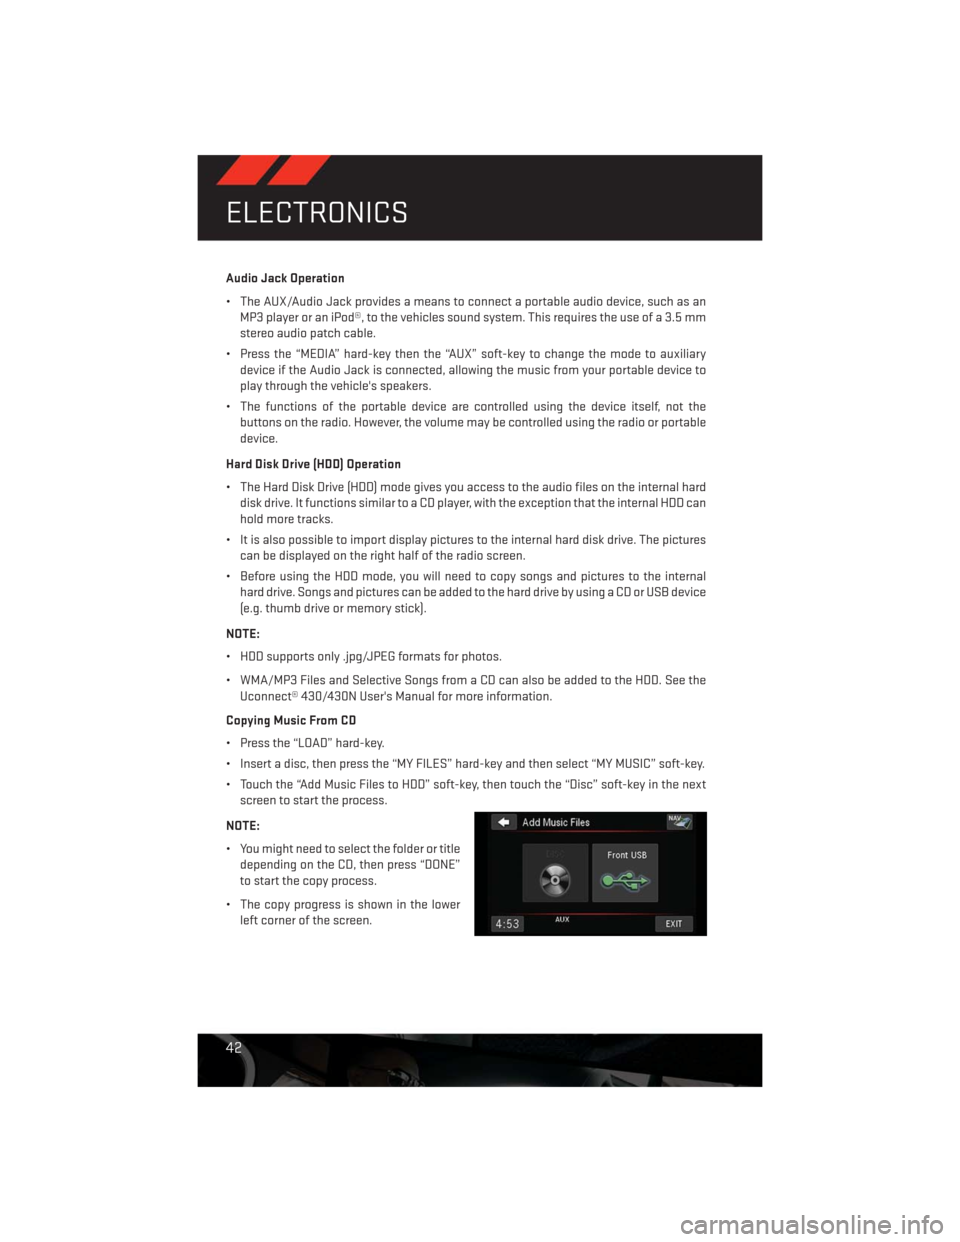 DODGE CHALLENGER 2013 3.G User Guide Audio Jack Operation
• The AUX/Audio Jack provides a means to connect a portable audio device, such as an
MP3 player or an iPod®, to the vehicles sound system. This requires the use of a 3.5 mm
ste